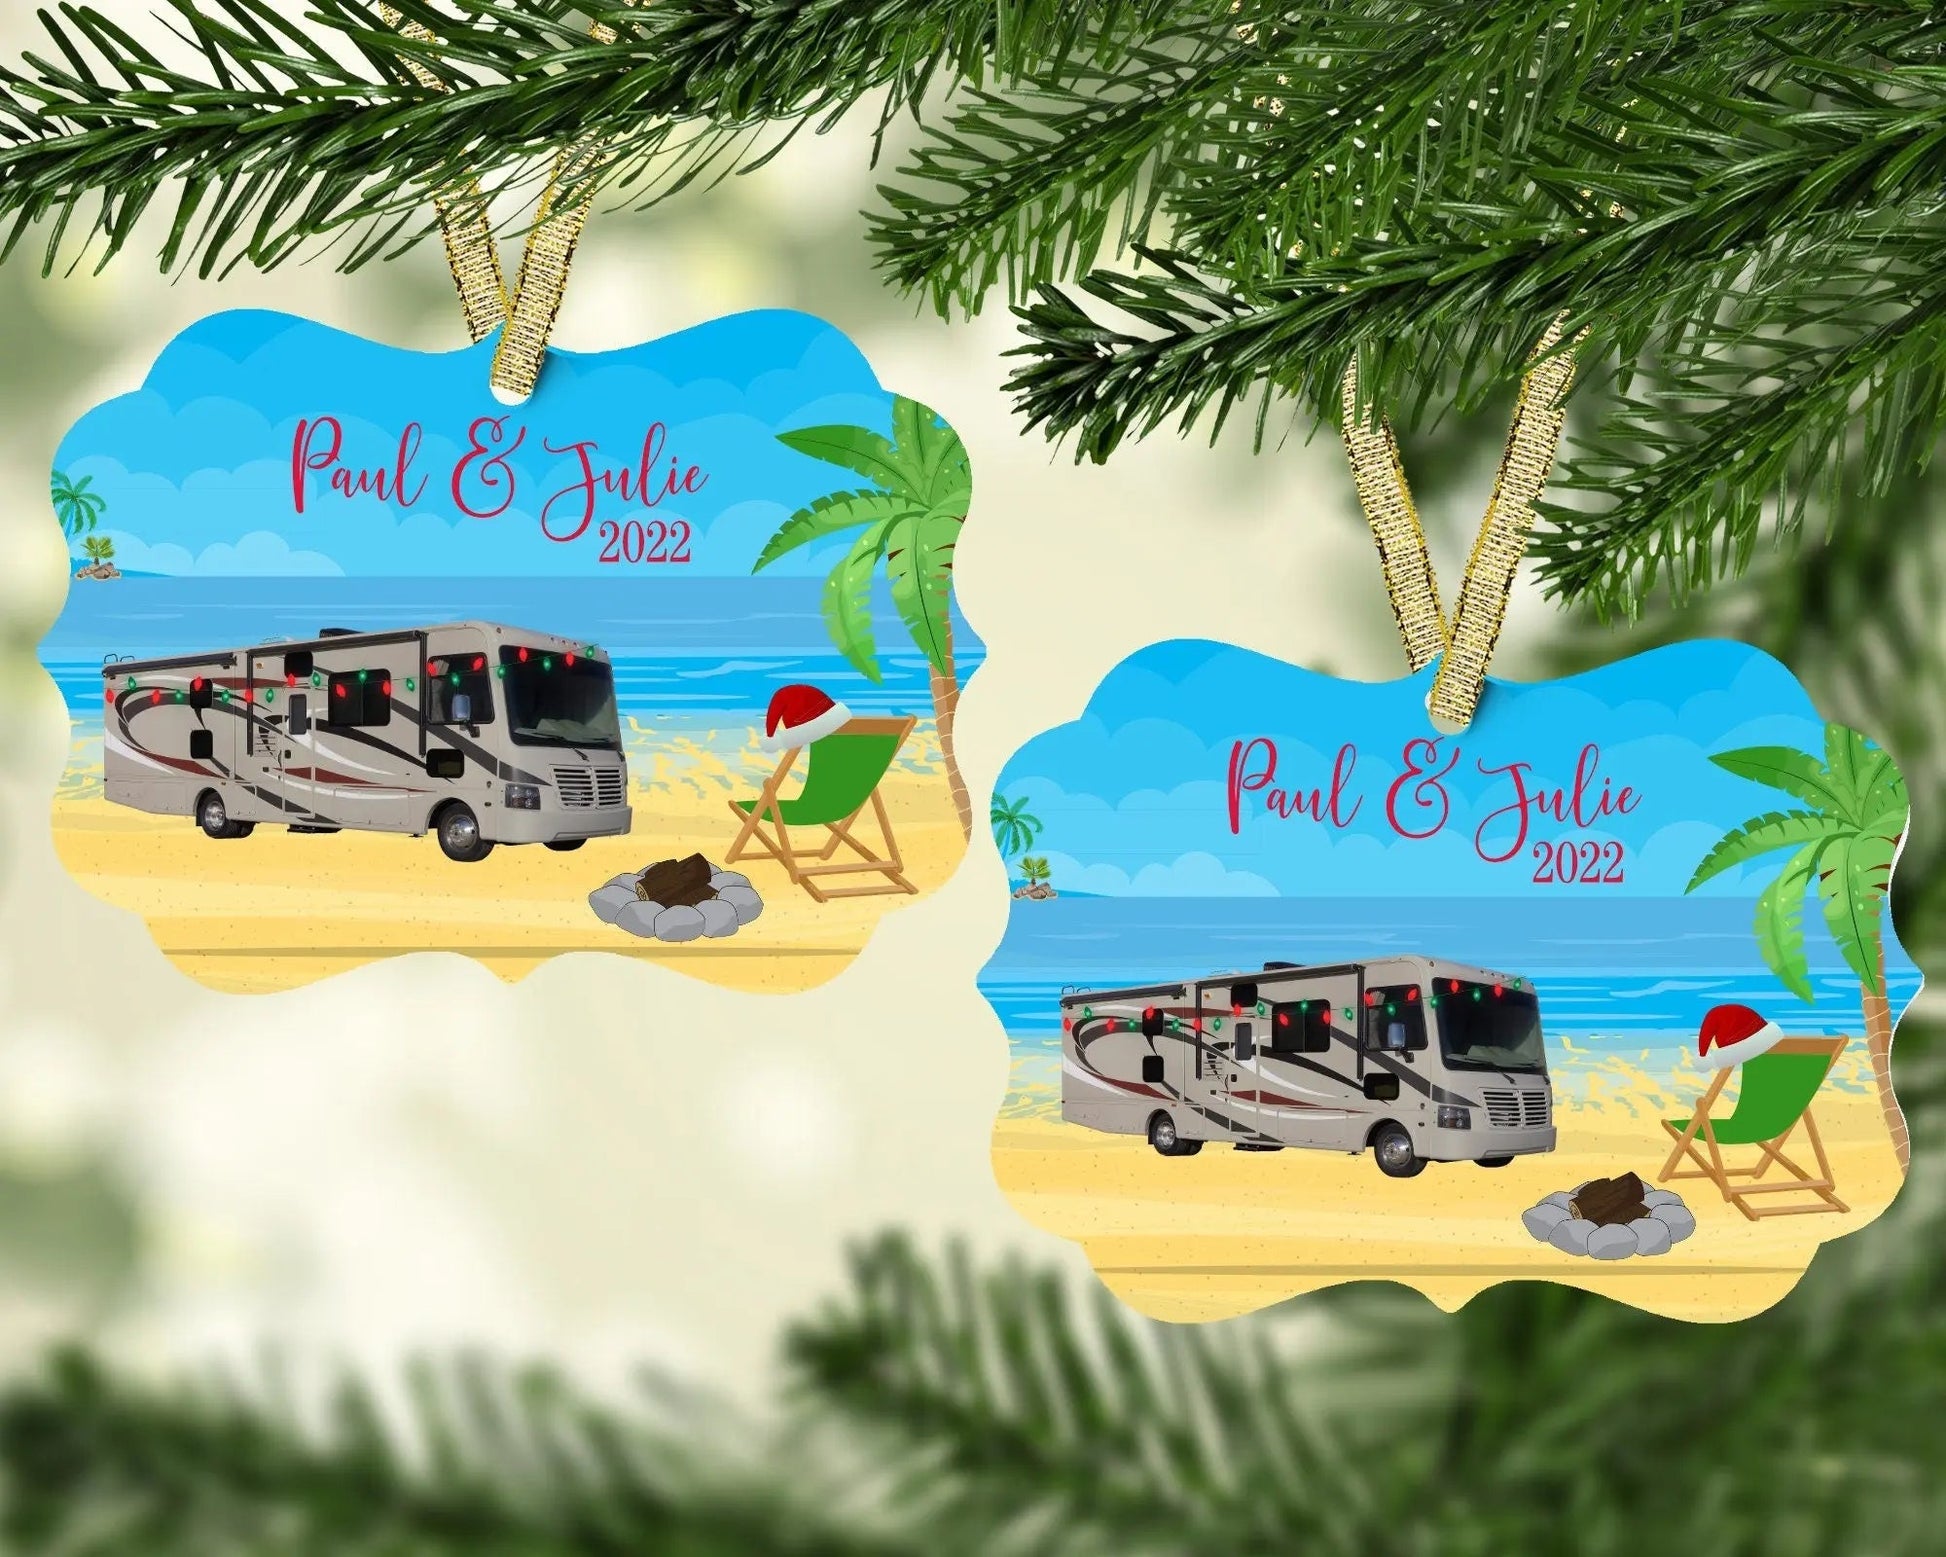 Pursuit Motorhome Christmas Ornament. Personalized beach camping Christmas ornament - Jammin Threads